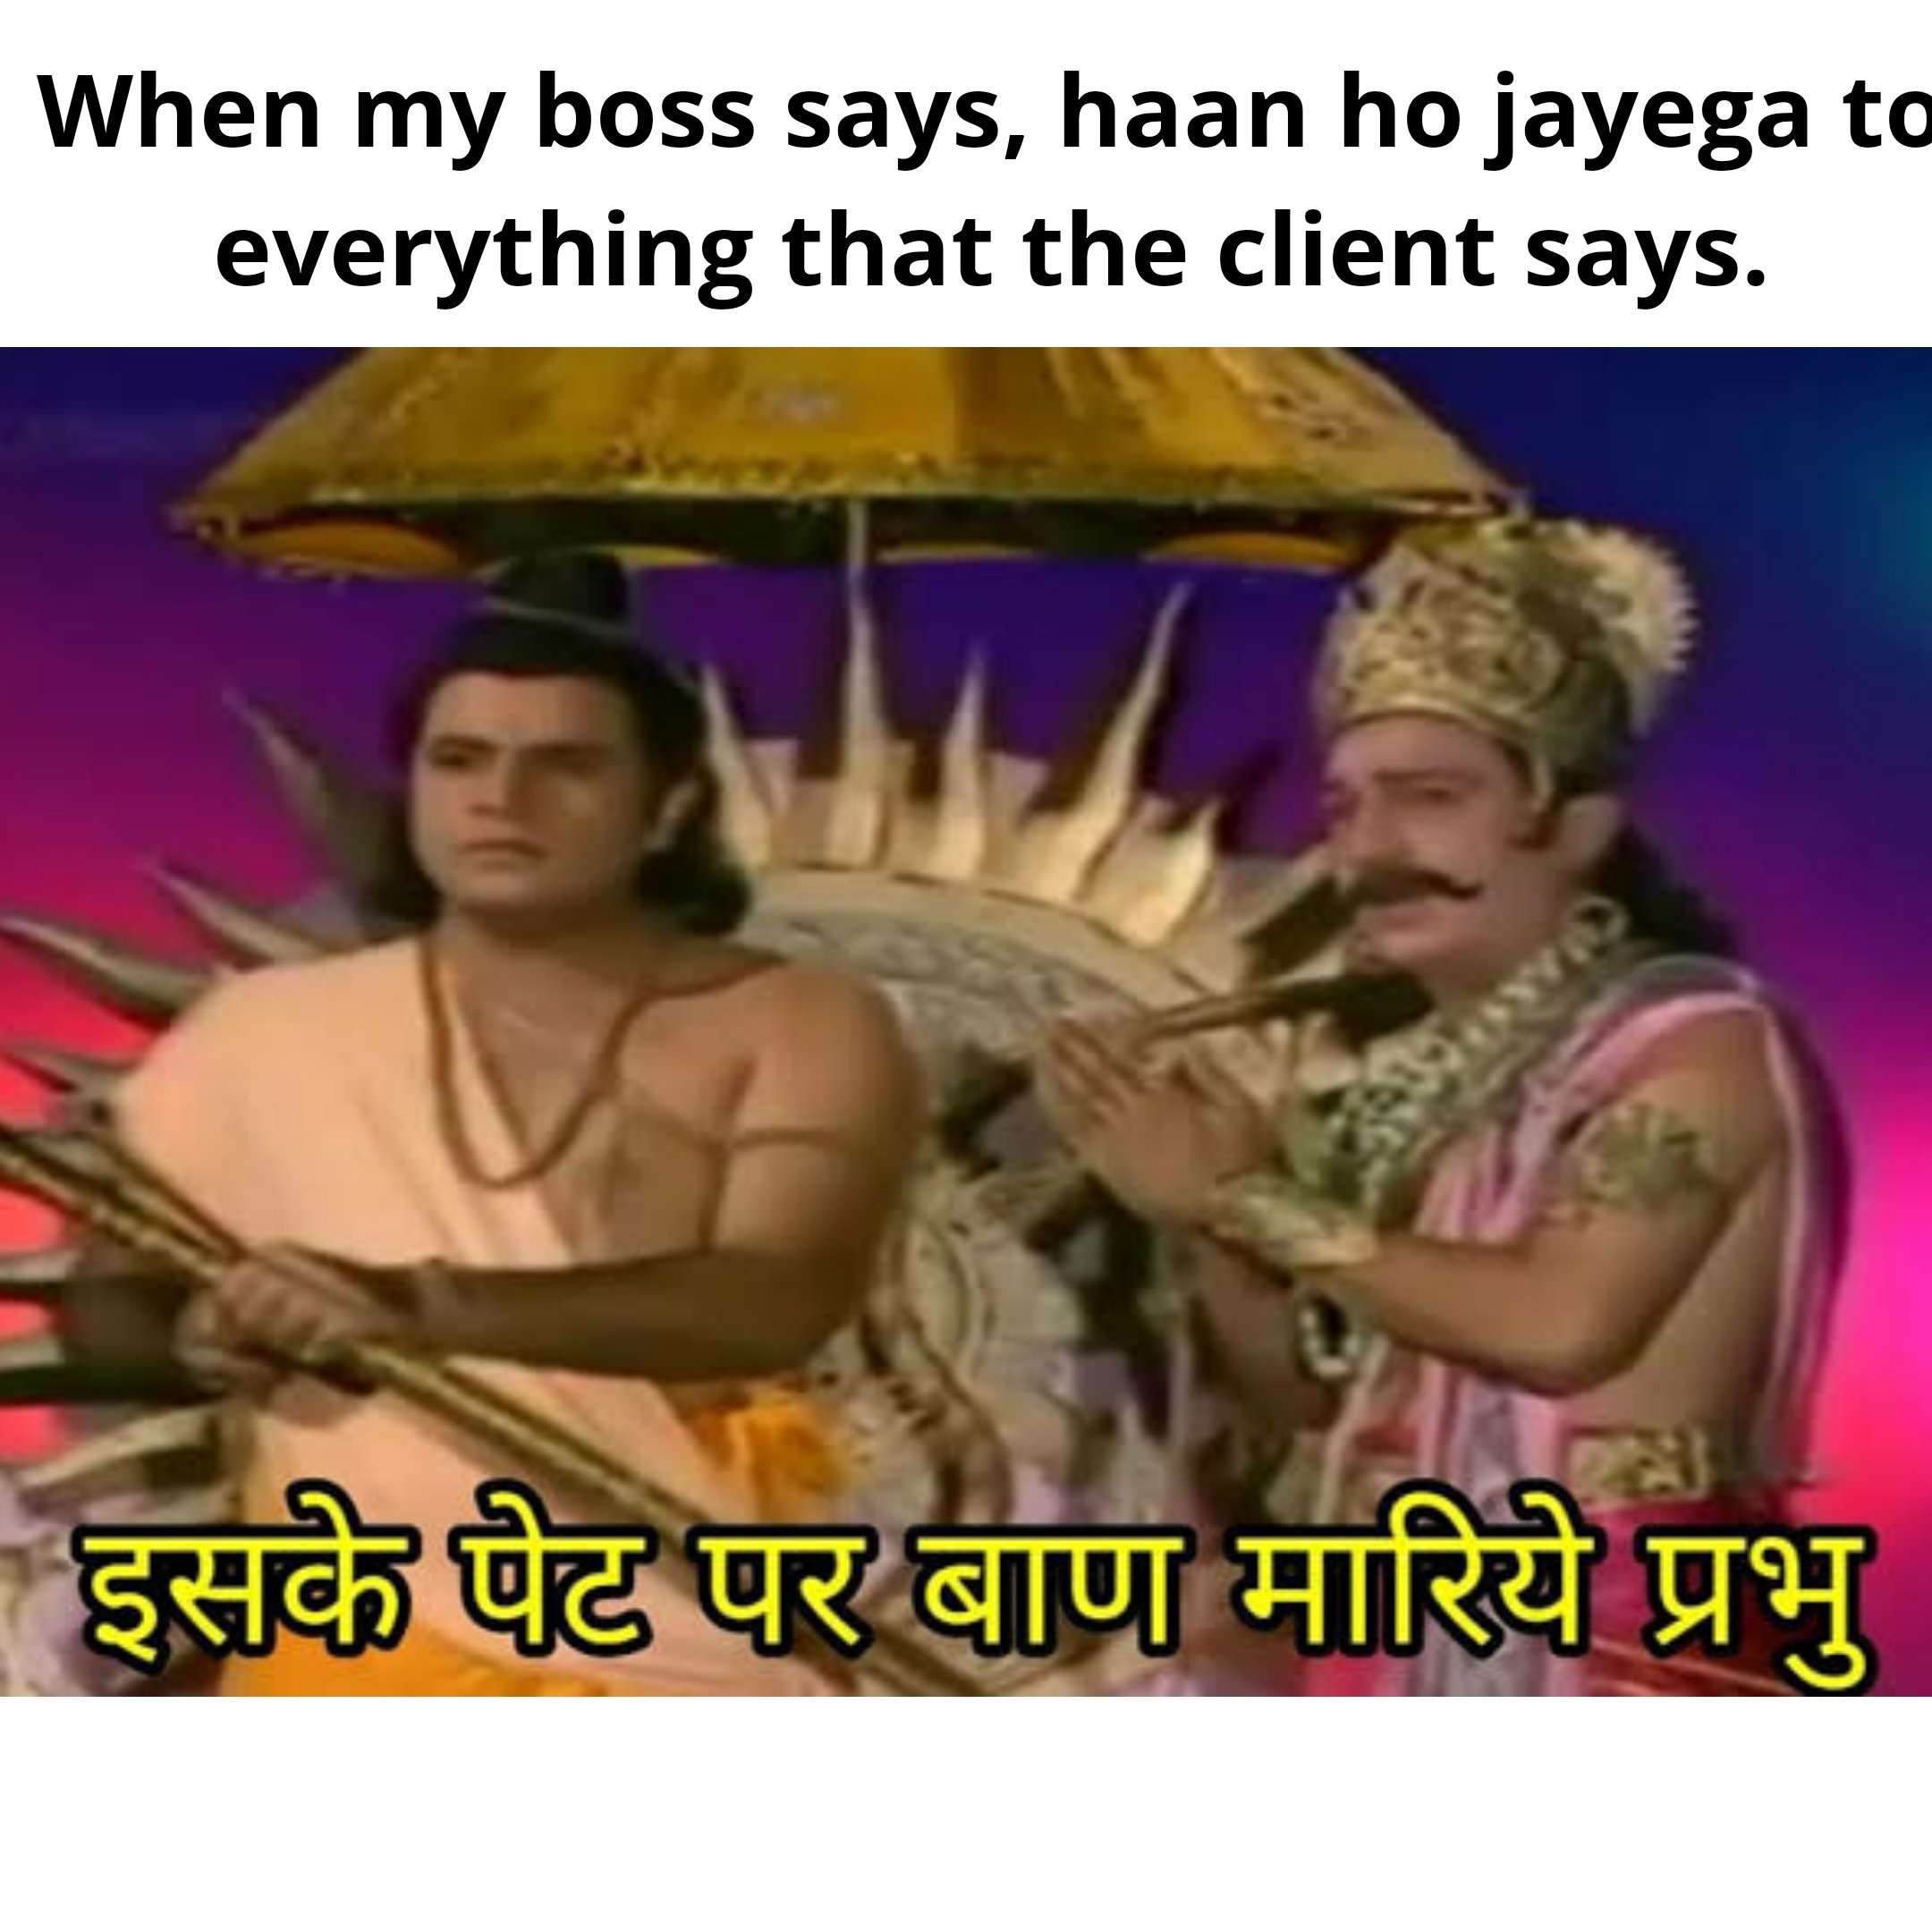 Telemacos Vandt Bermad Boss Day Memes, Wishes, Messages & Images: Happy Boss' Day 2020: Funny memes  about Bosses that will make you laugh out loud | - Times of India